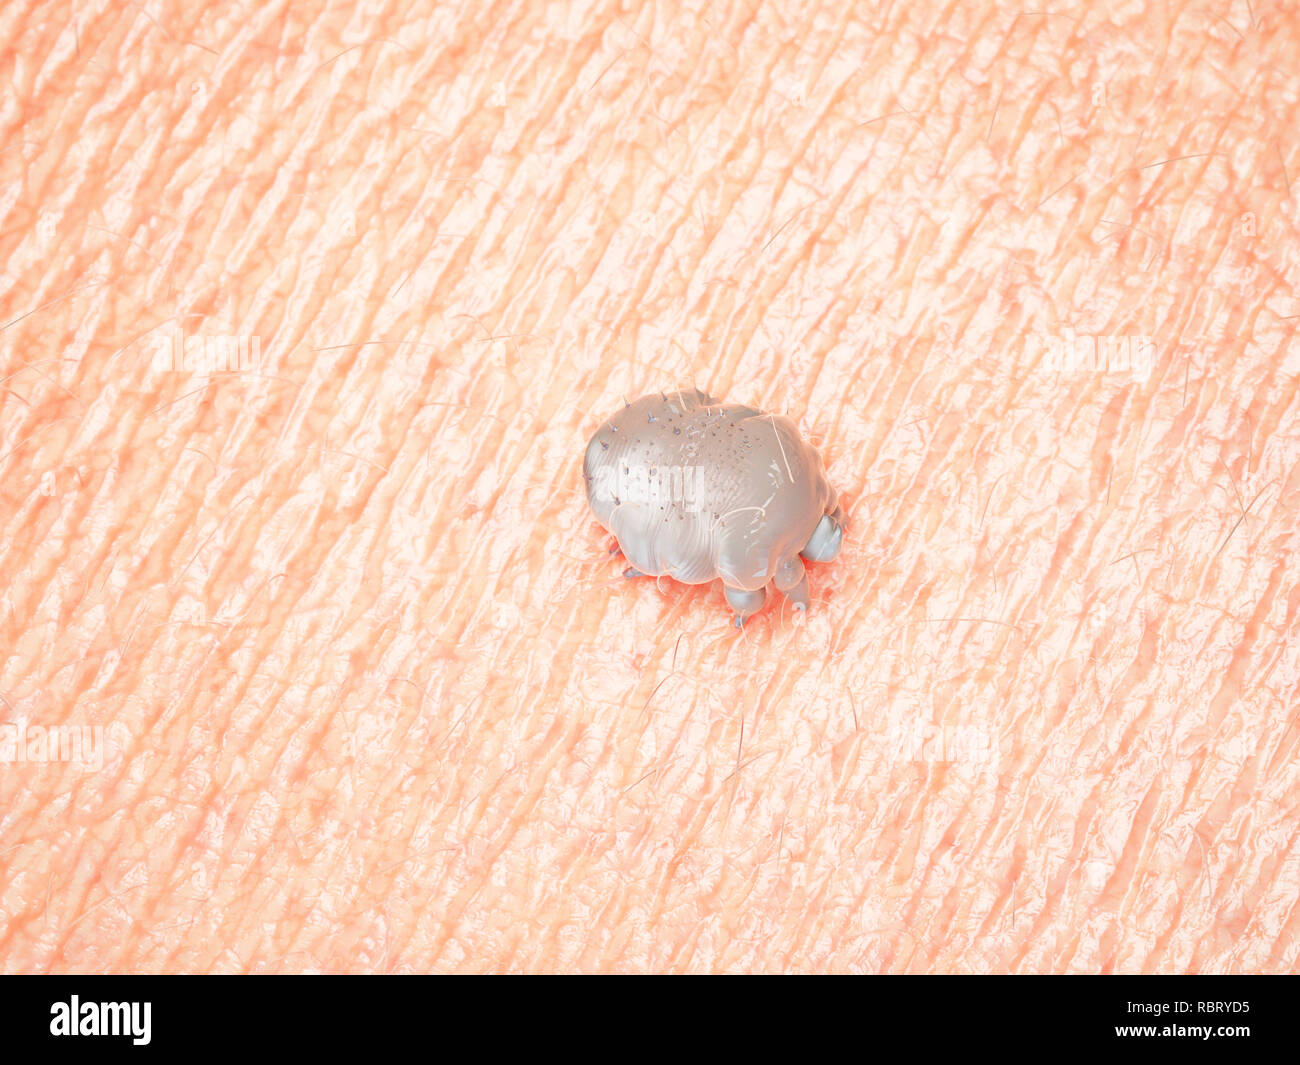 Illustration Of A Scabies Mite Stock Photo Alamy